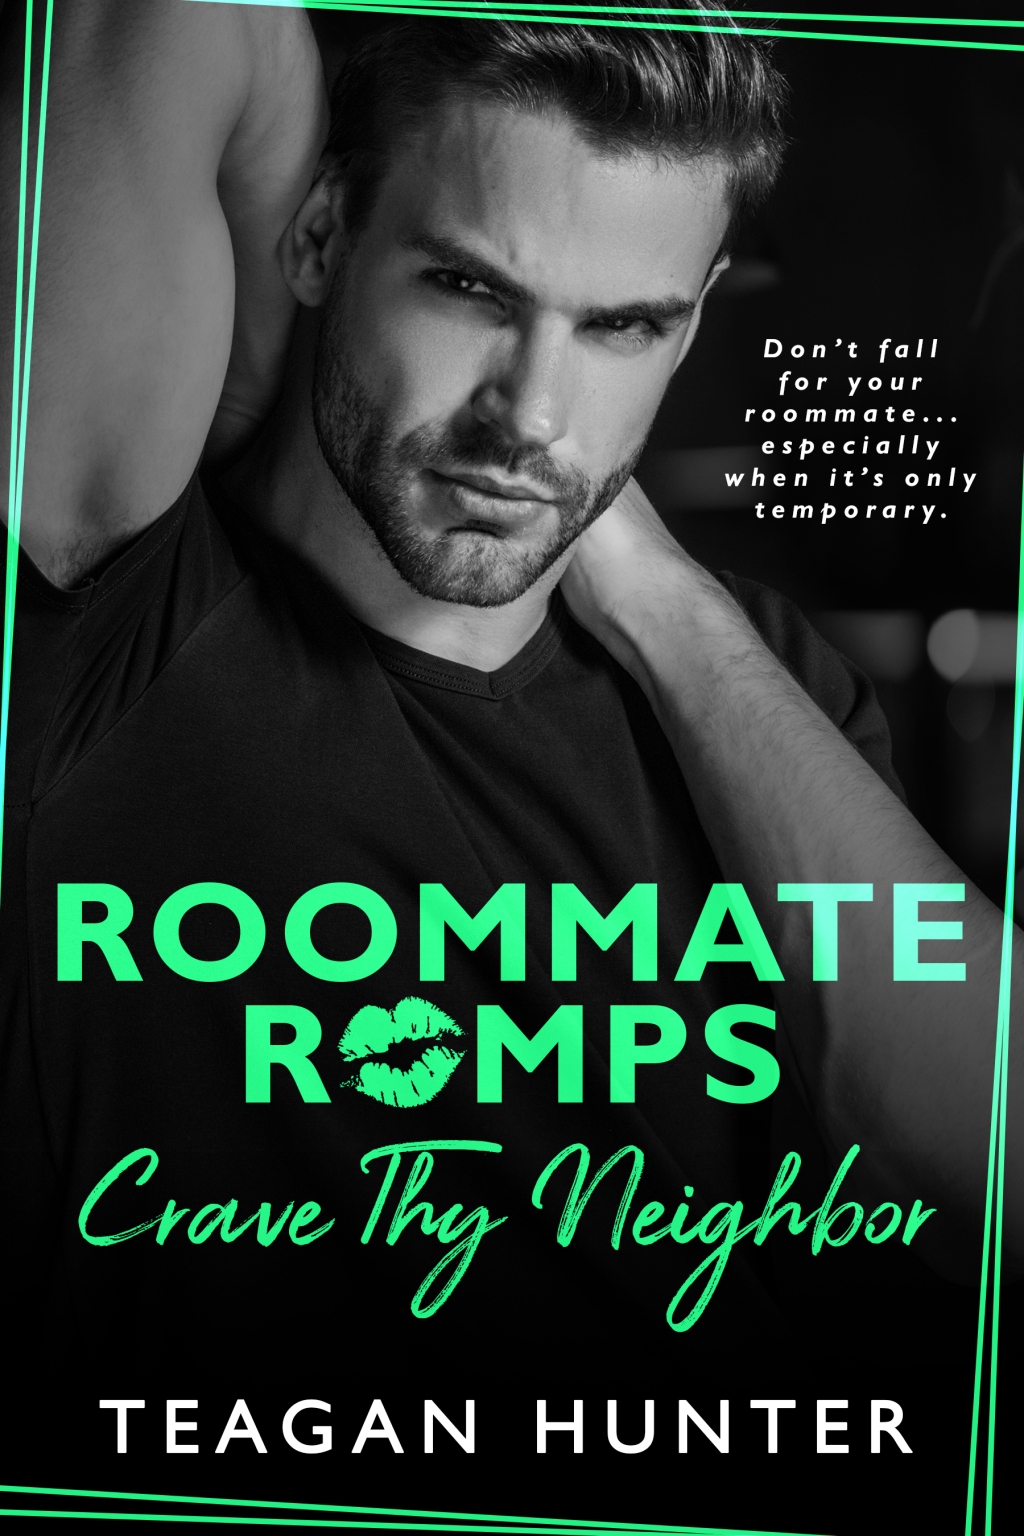 Crave Thy Neighbor by Teagan Hunter (Book Review) 4.5 of 5 Stars!